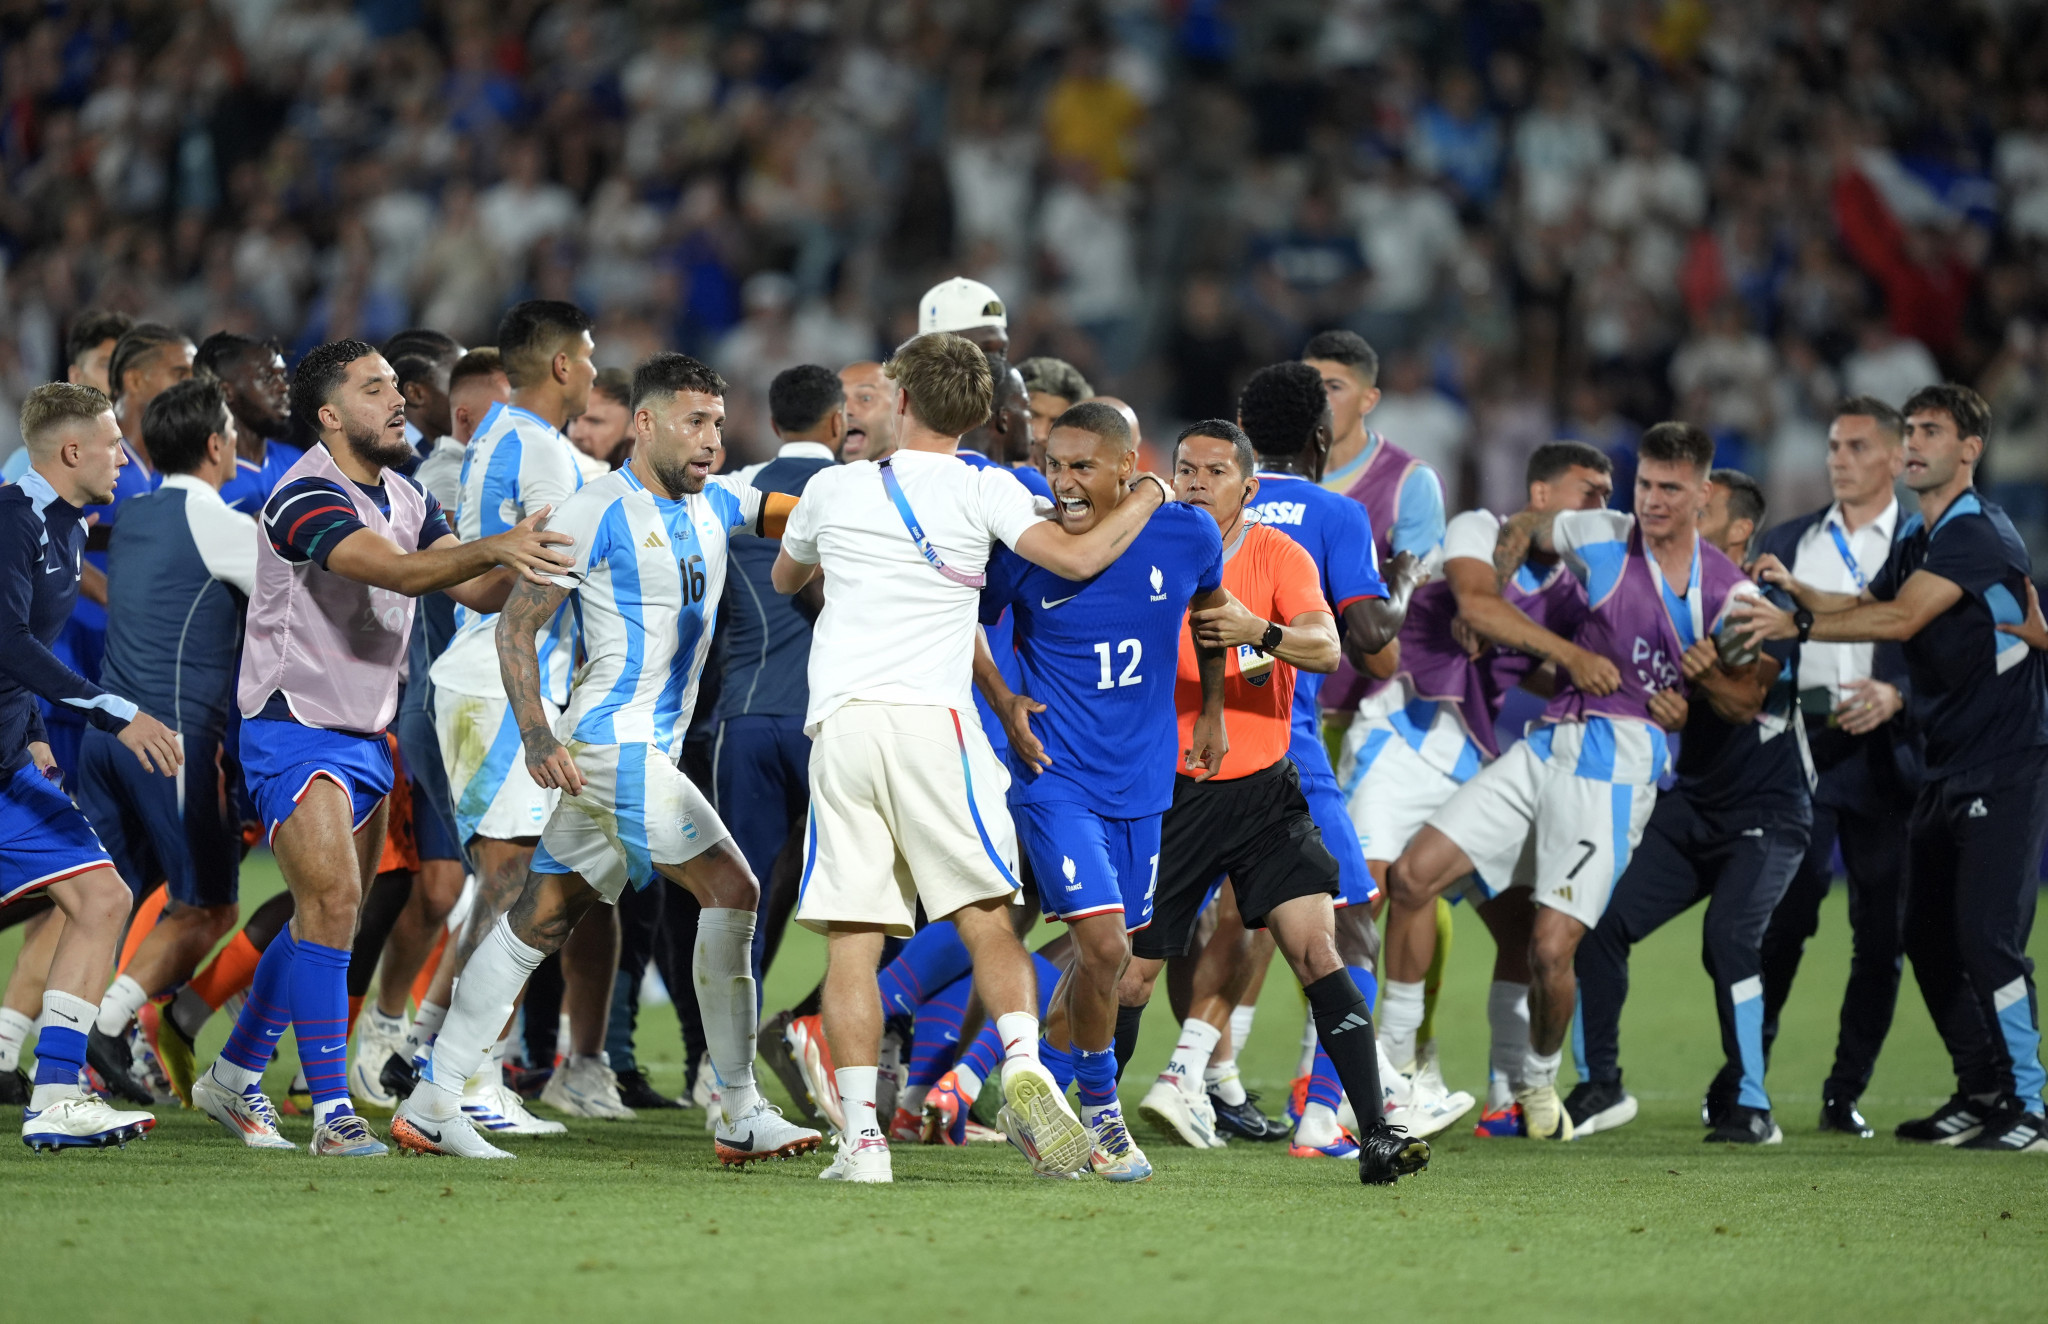 Football players from Argentina and France clash after the Men's Quarterfinal match at the Paris 2024 Olympic Games. GETTY IMAGES